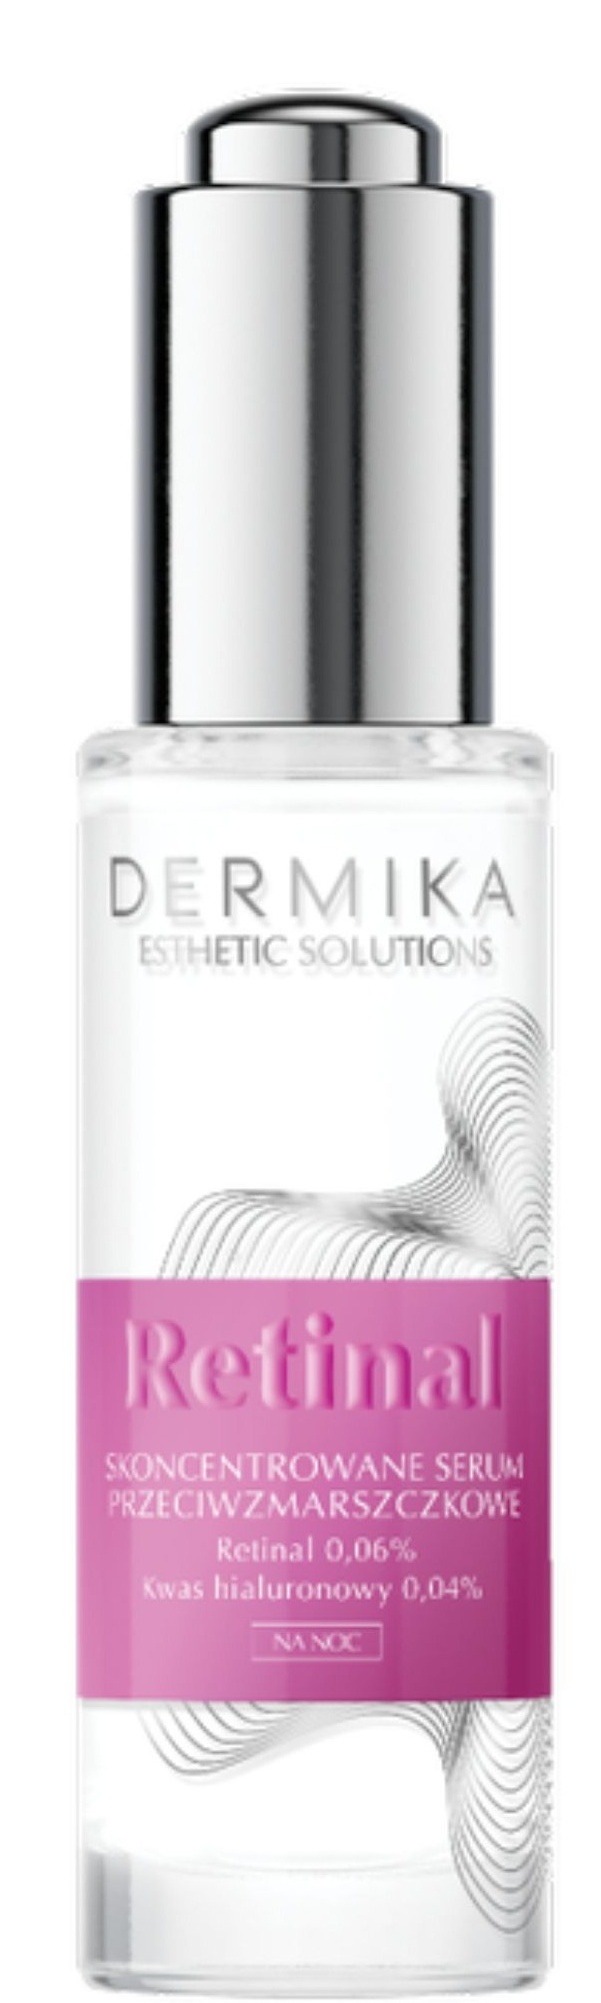 Dermika Esthetic Solutions Retinal Concentrated Anti-Wrinkle Serum